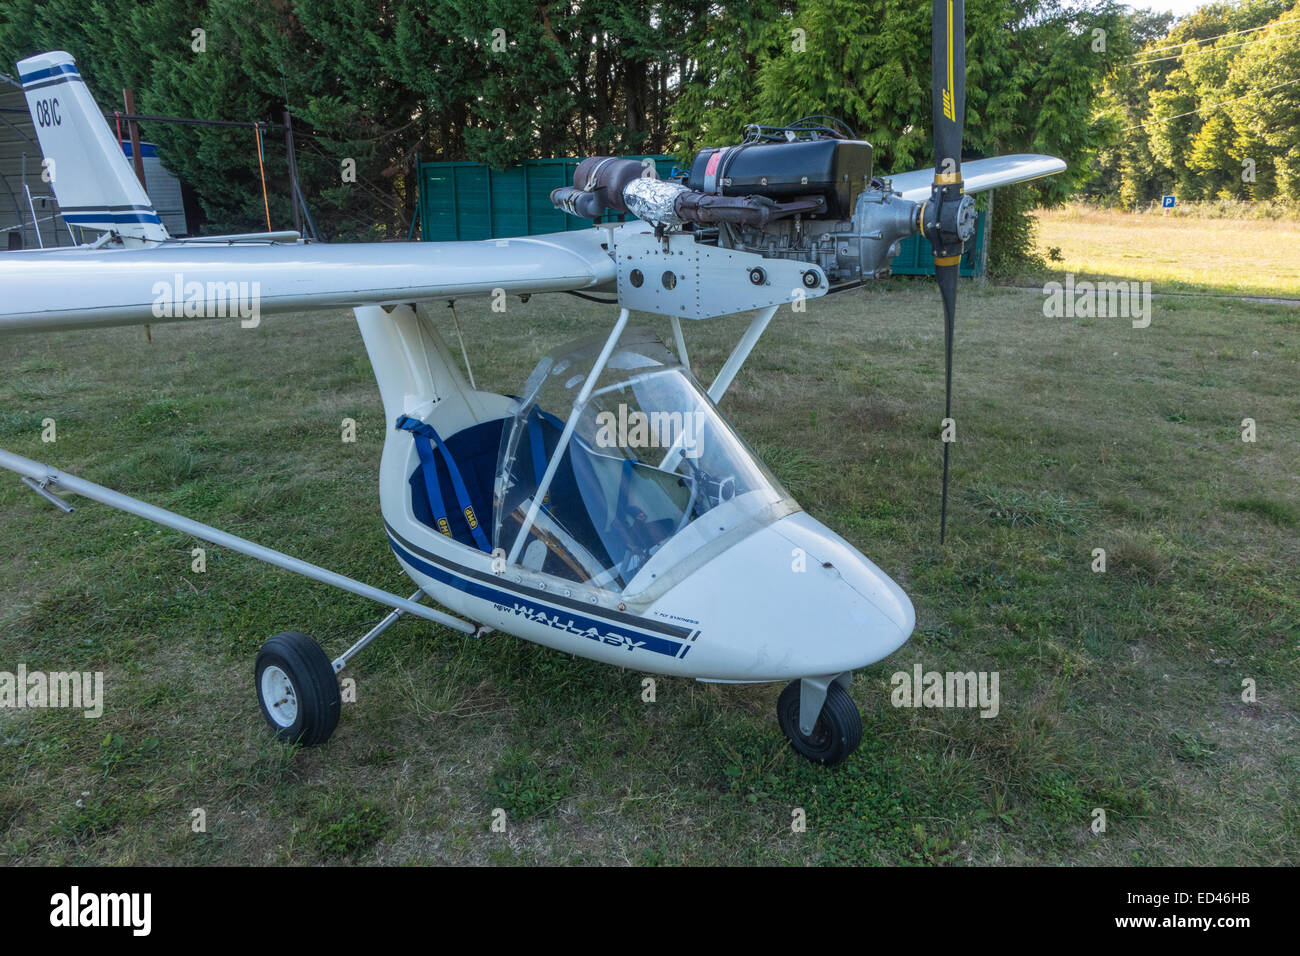 ULM Microlight, Microlite aircraft ready to fly at small airstrip, airfield Stock Photo